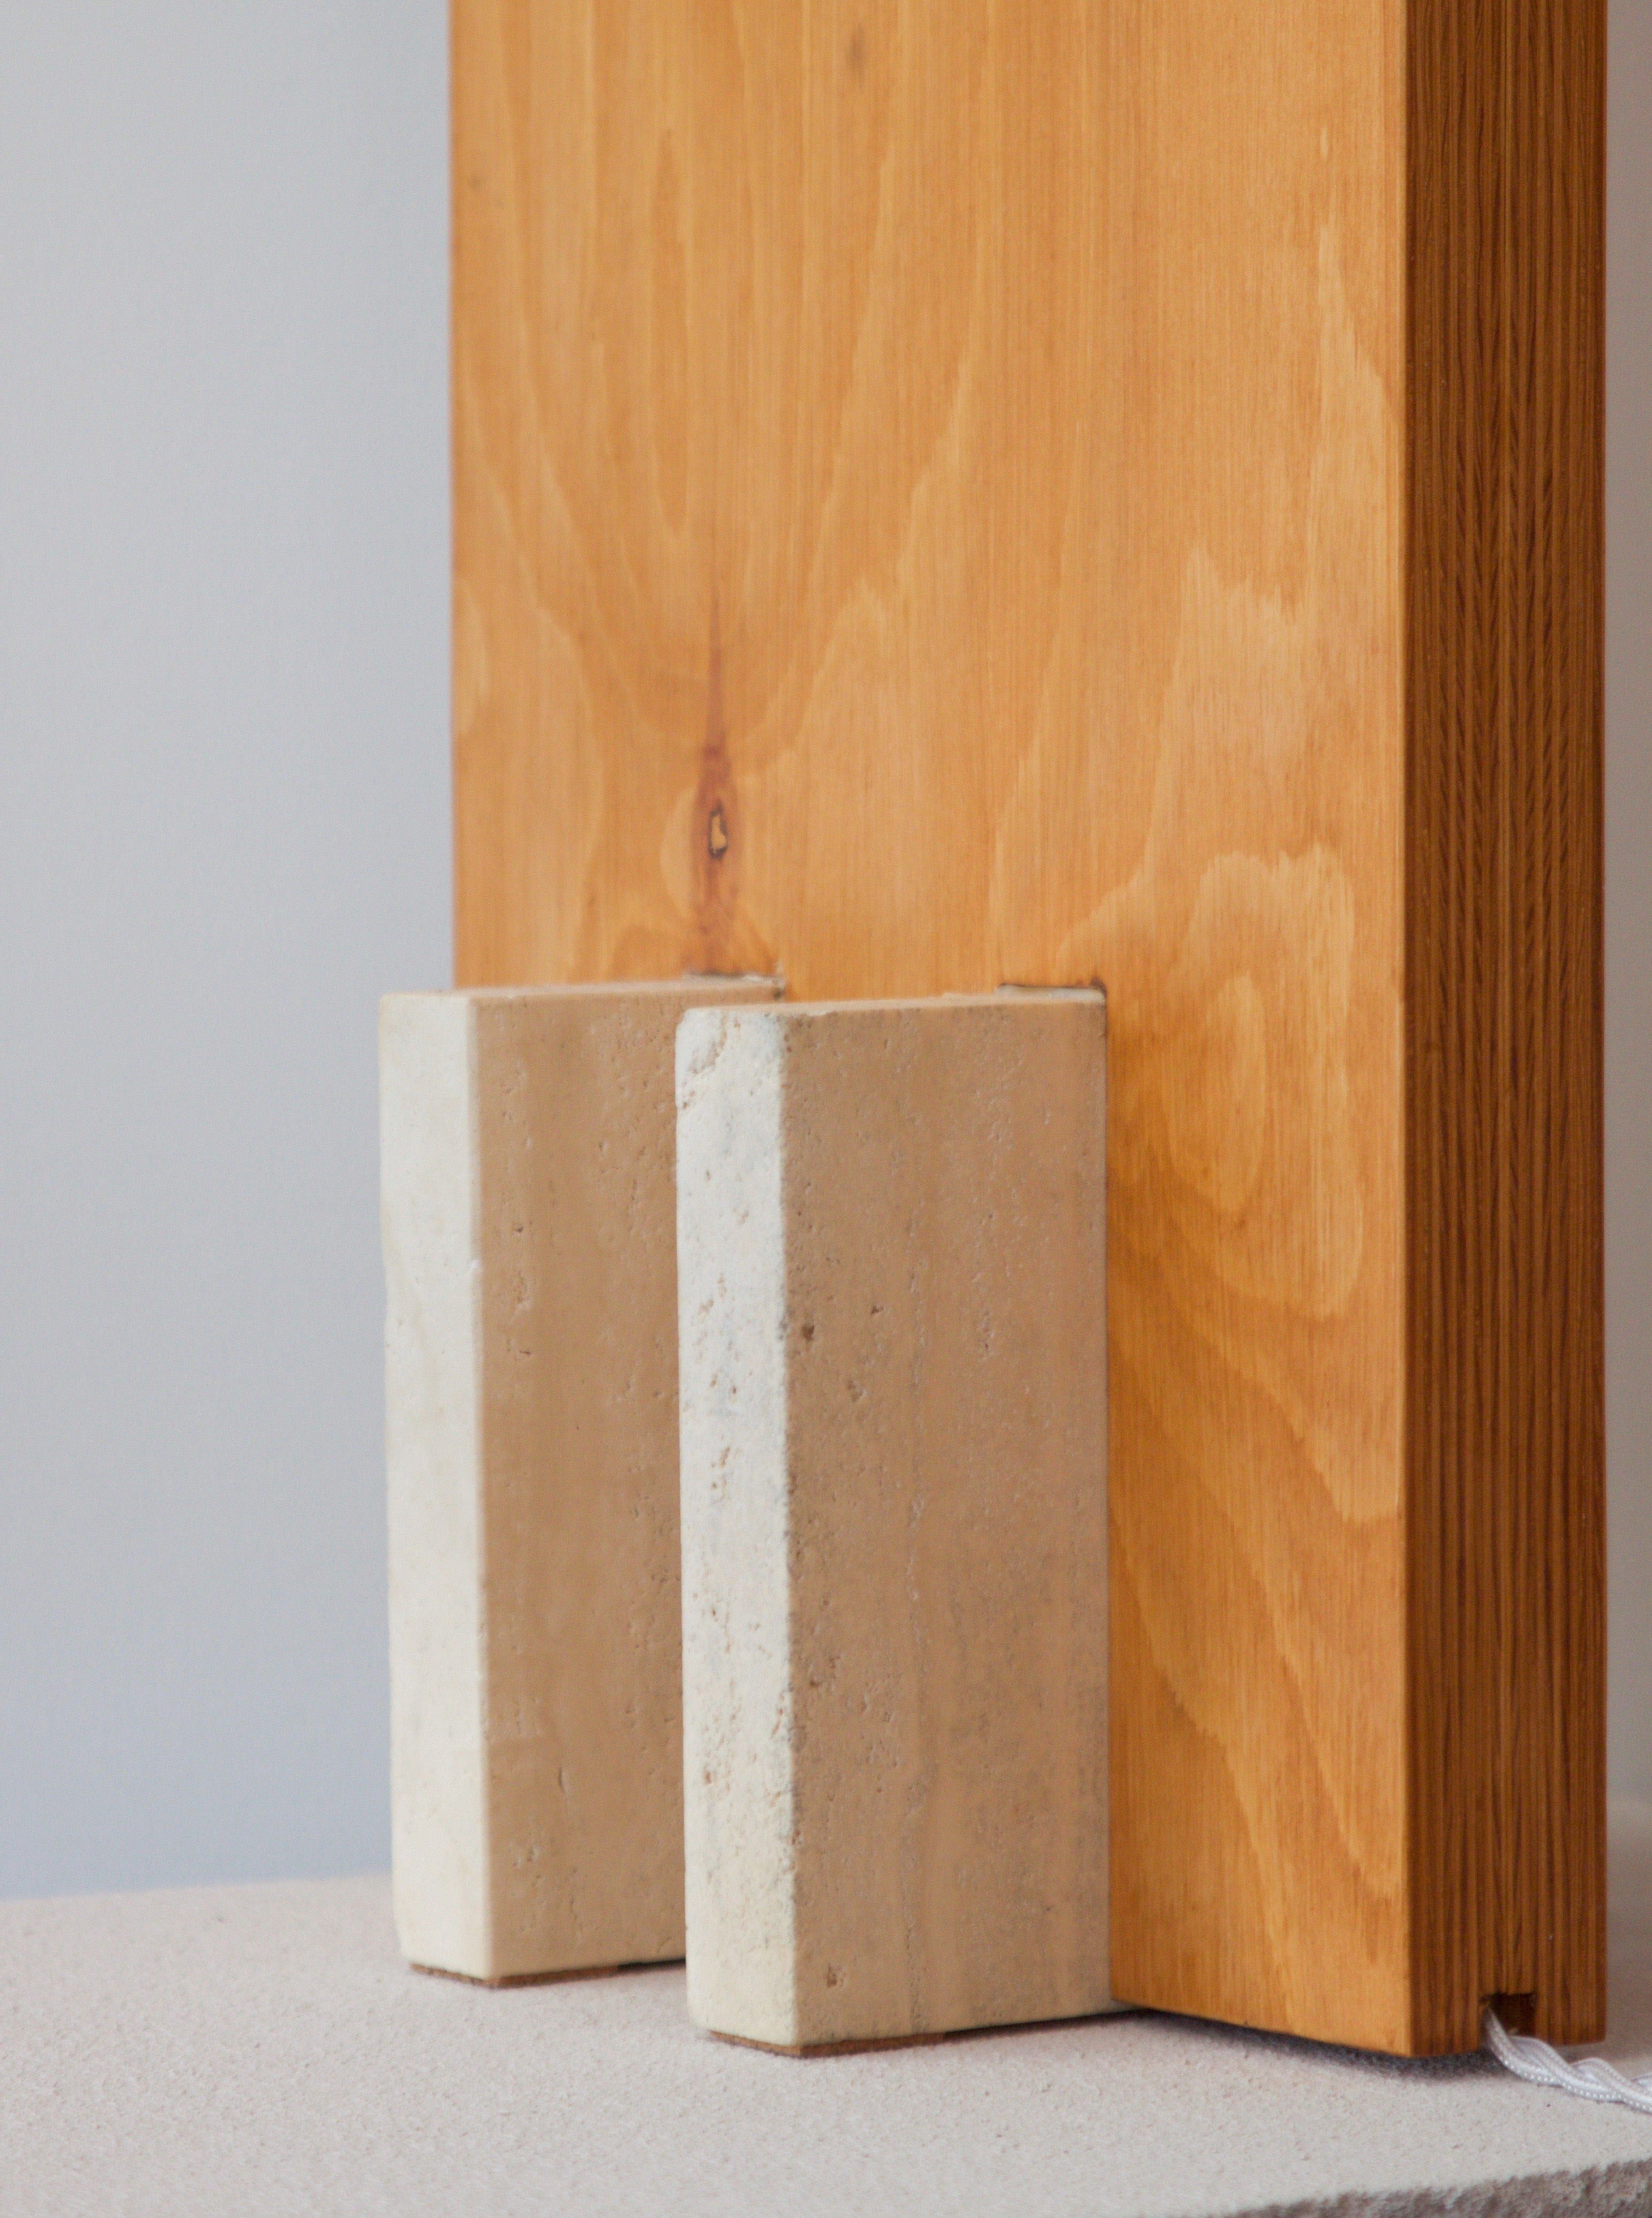 Two Galileo 2.3 beige bricks support a vertical wooden plank against a plain light-colored wall and floor lamp.